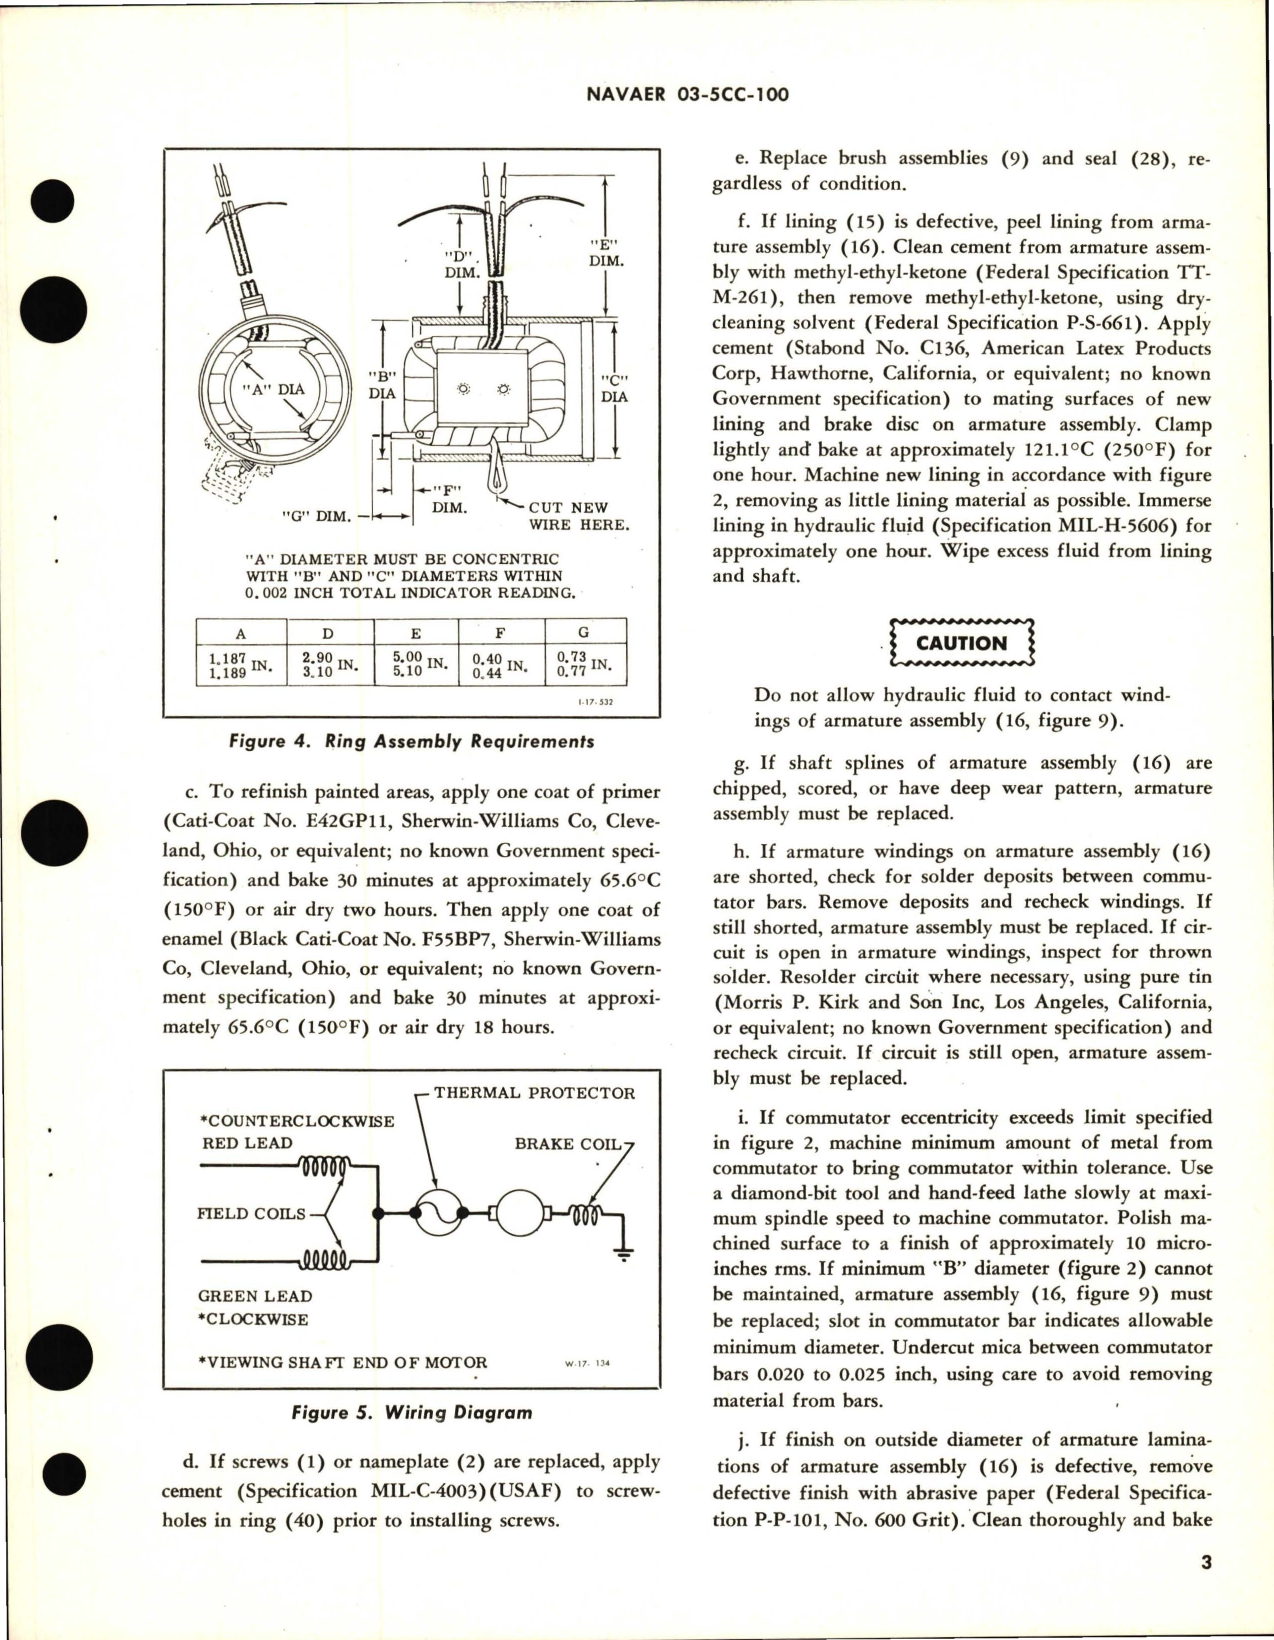 Sample page 5 from AirCorps Library document: Overhaul Instructions with Parts Breakdown for HP 26 Volt Direct Current Motor 0.08 Part 26300